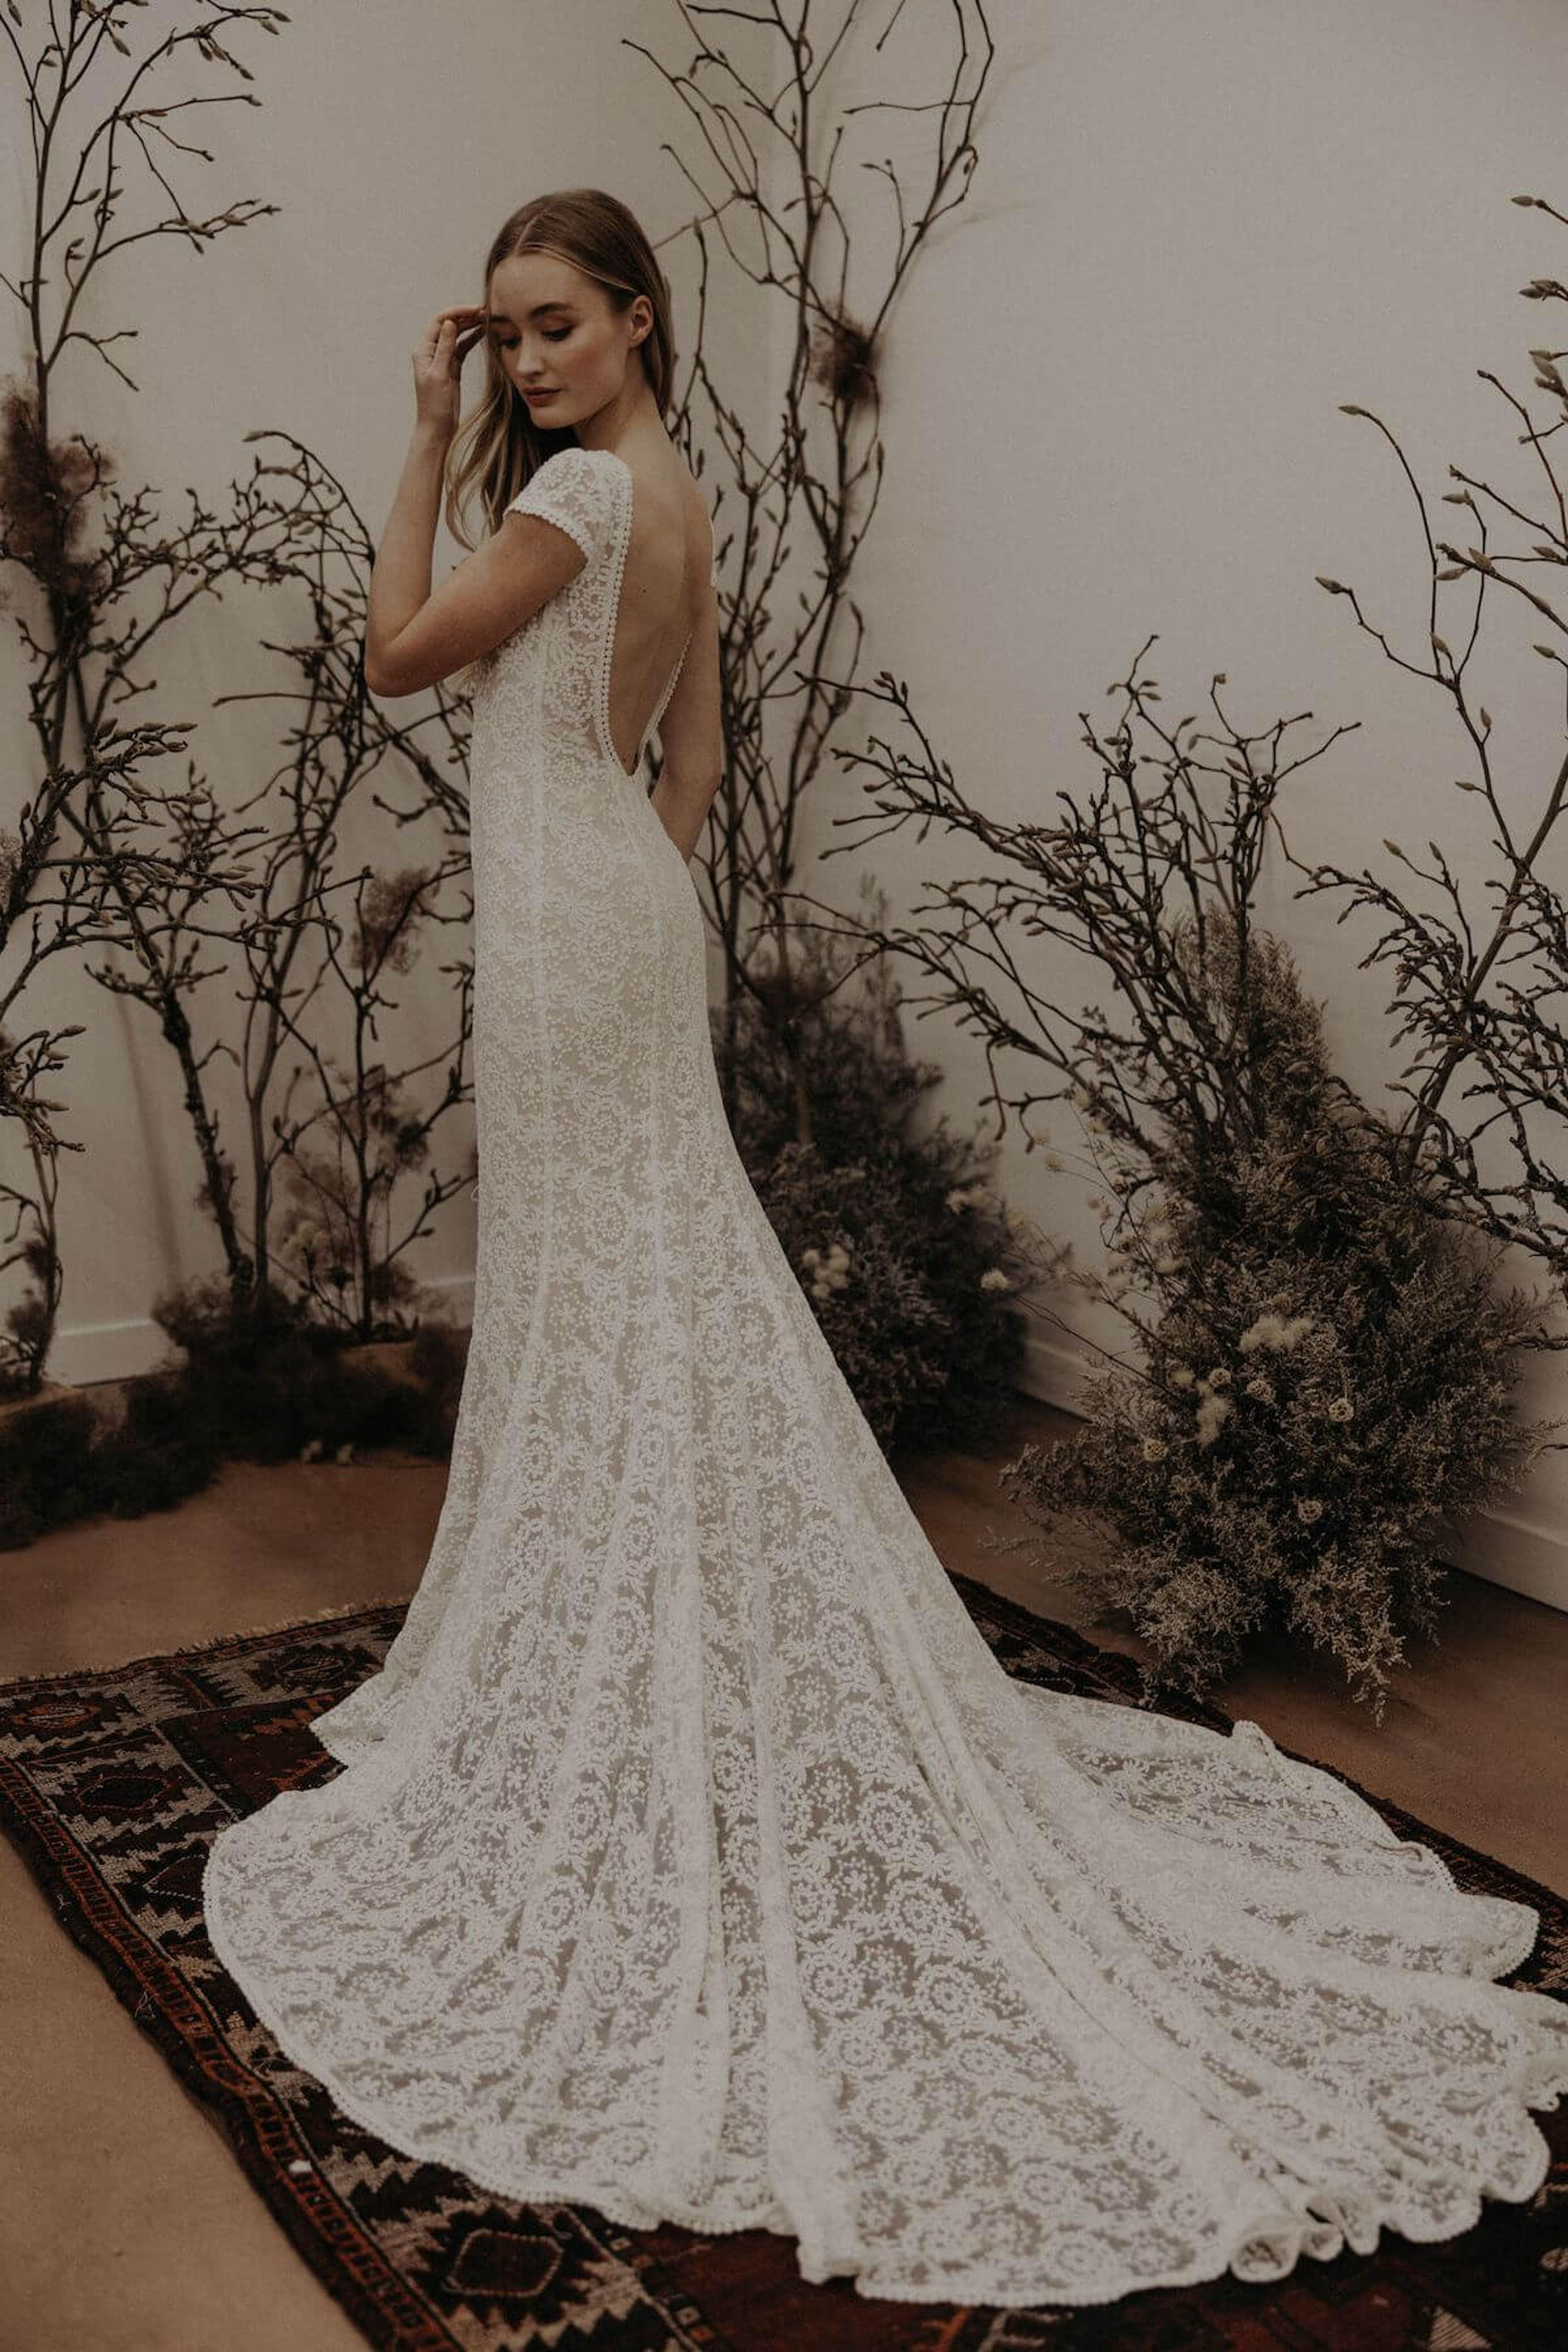 Nellia Cap Sleeve Lace Wedding Dress | Dreamers and Lovers